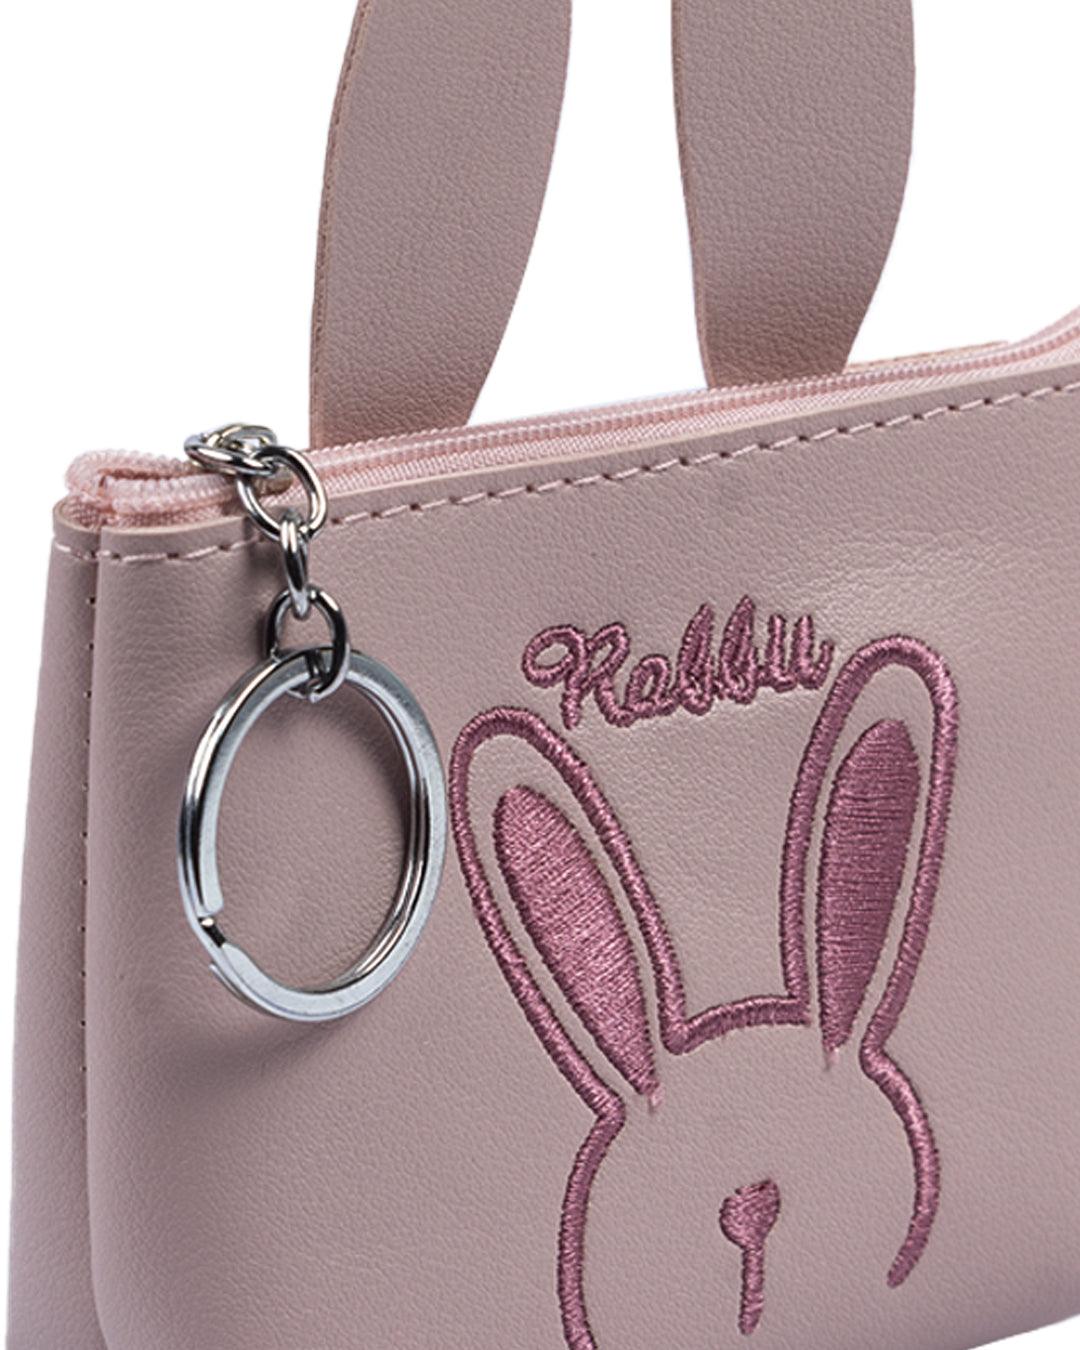 Donati Coin Pouch, Bunny Print, Pink, PU Leather - MARKET 99